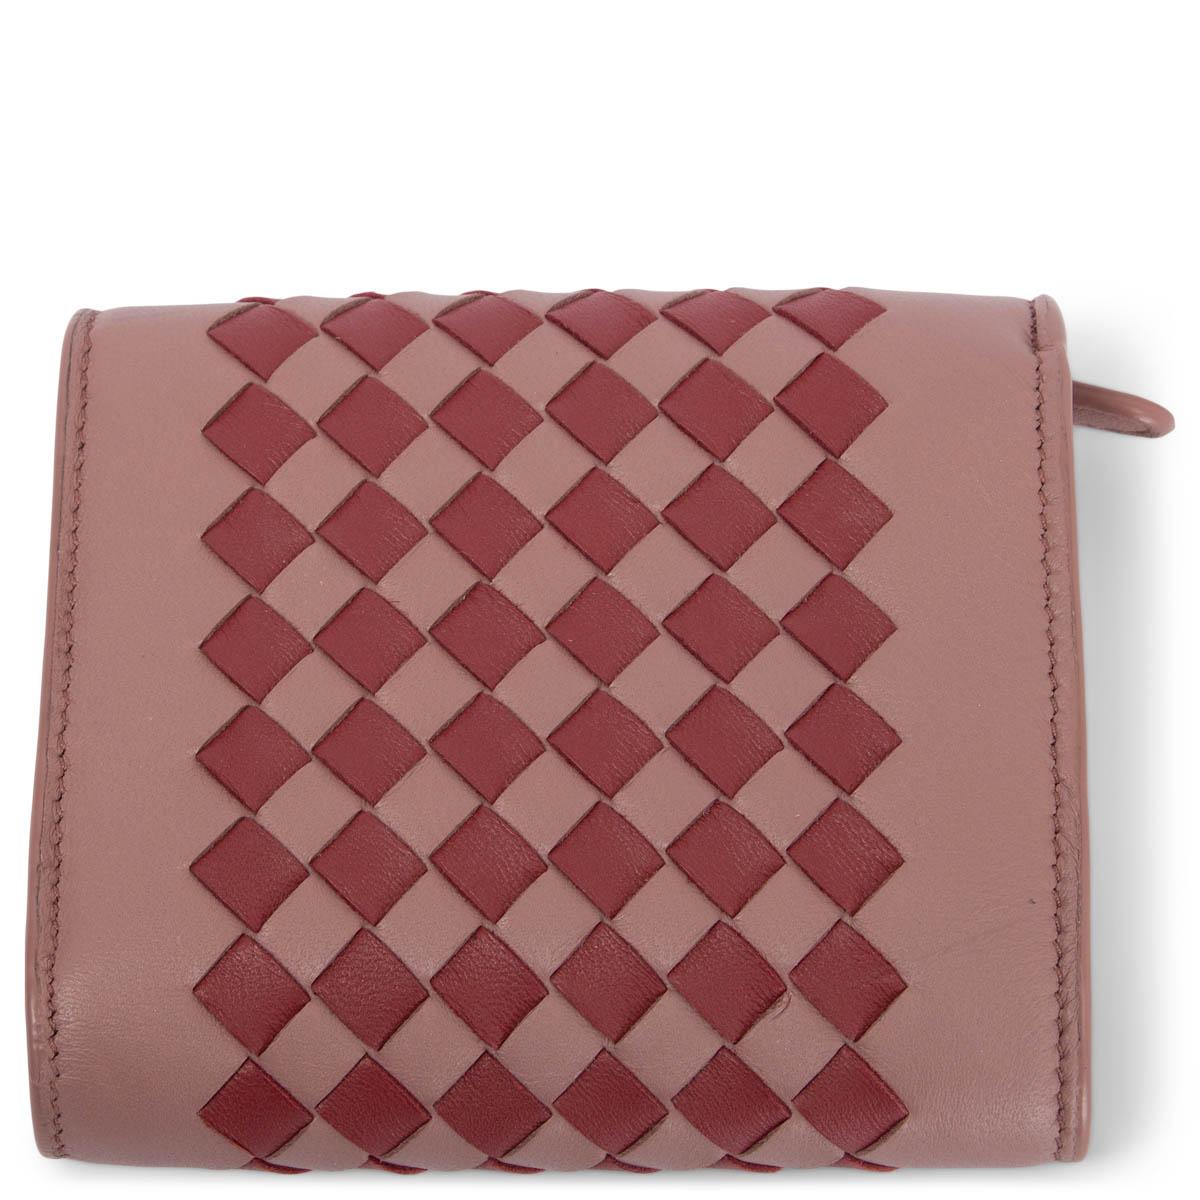 100% authentic Bottega Veneta Intrecciato two-tone wallet in dusty pink and magenta nappa leather. Opens with a push-button to a dusty pink nappa leather interior with ten credit card slots, a zipped coin-pocket and a slip pocket for bills. Has been